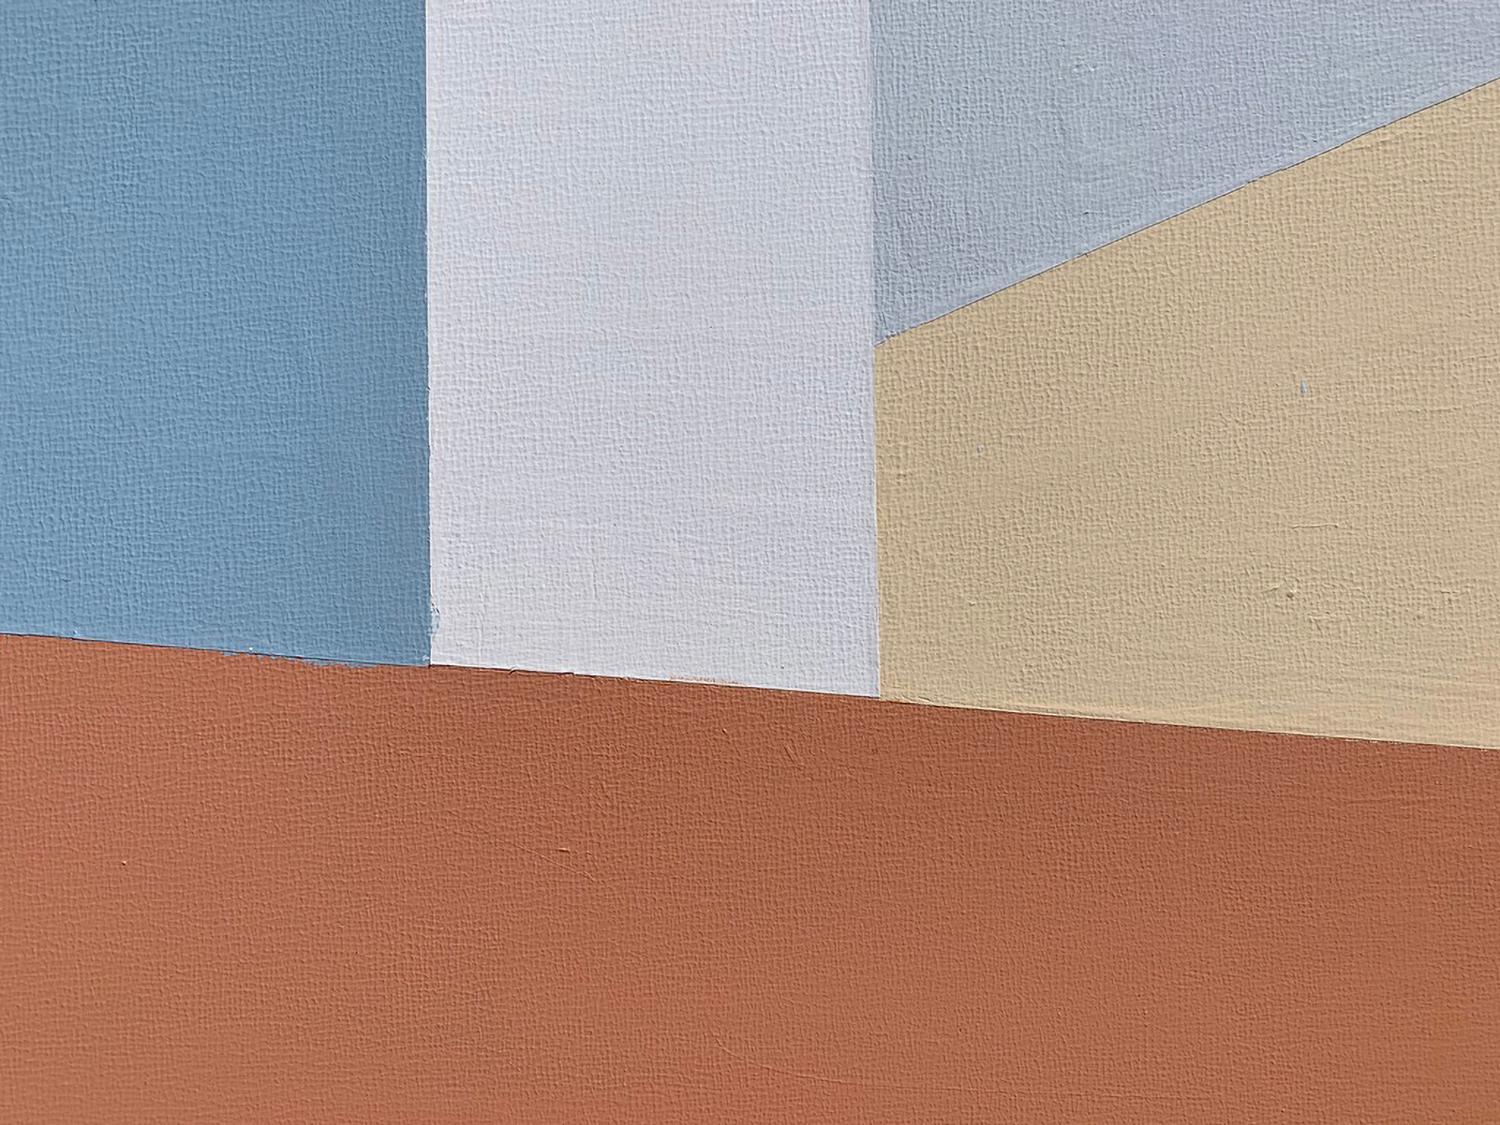 <p>Artist Comments<br>Artist Craig Rouse interprets an architectural abstract landscape using a limited color palette. He reimagines the organized structures into playful compositions of light and shadow. Geometric linework resembles built